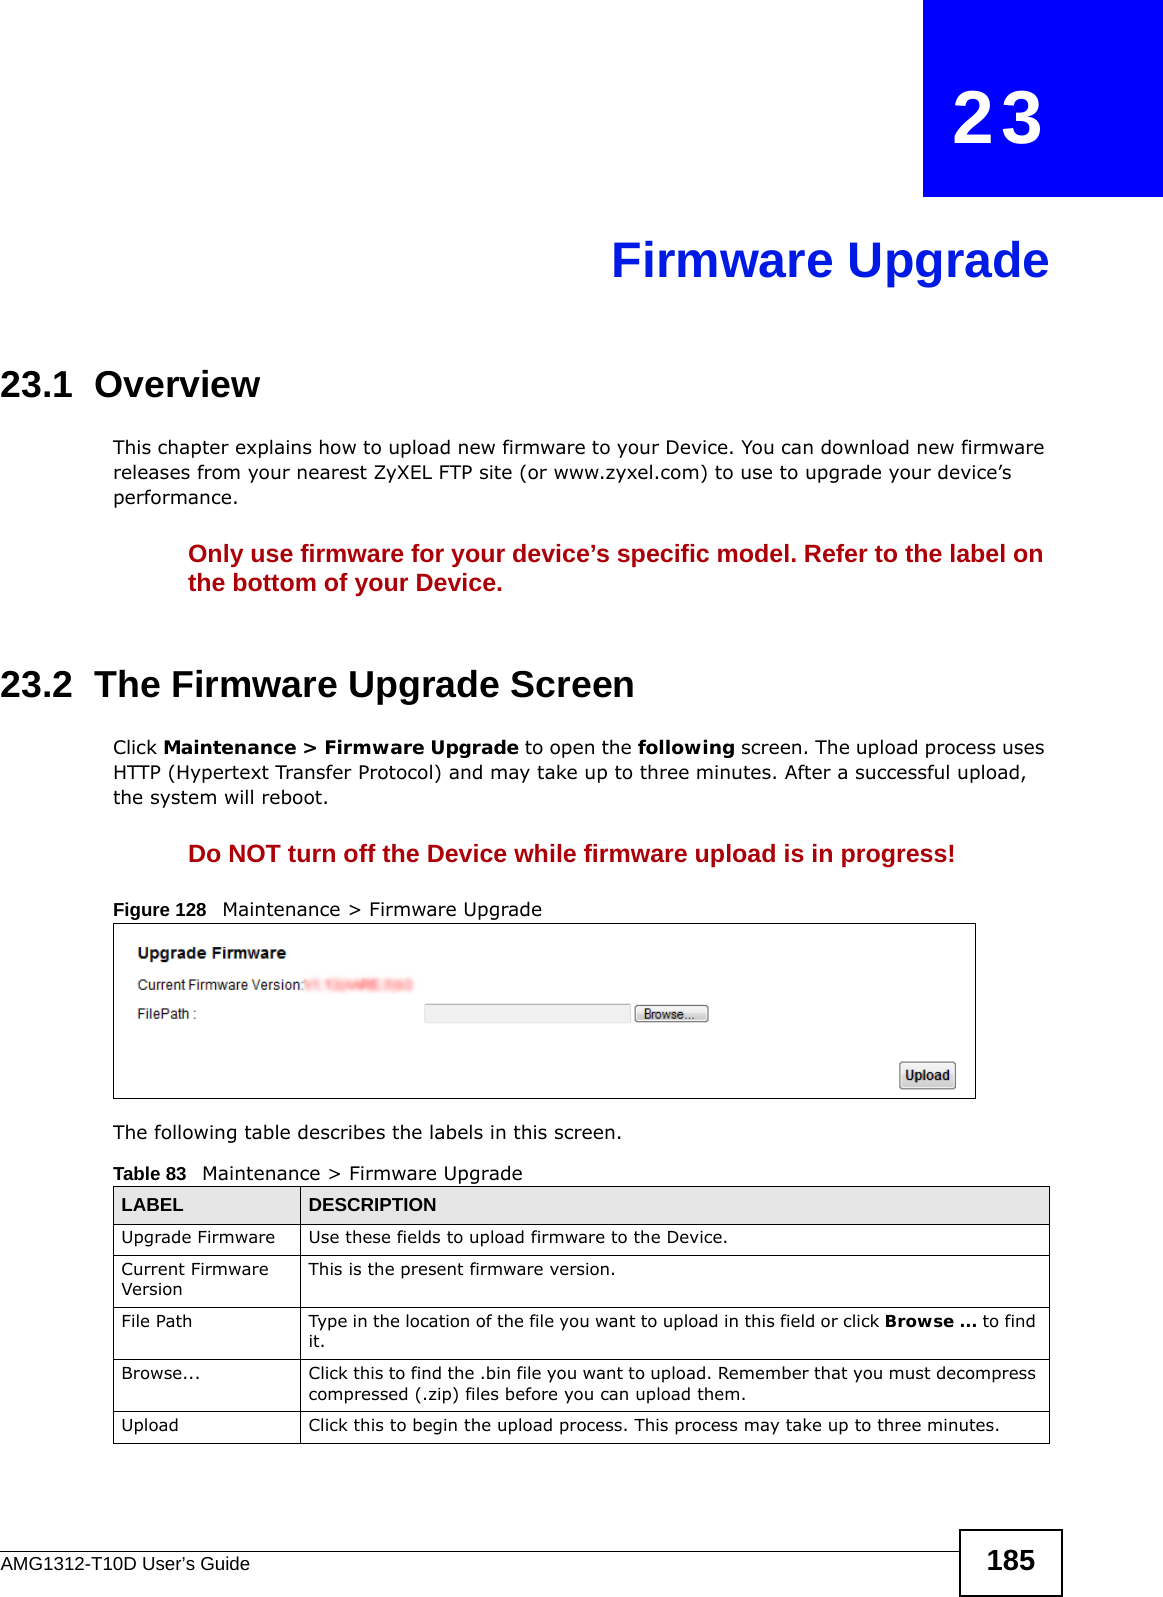 AMG1312-T10D User’s Guide 185CHAPTER   23Firmware Upgrade23.1  OverviewThis chapter explains how to upload new firmware to your Device. You can download new firmware releases from your nearest ZyXEL FTP site (or www.zyxel.com) to use to upgrade your device’s performance.Only use firmware for your device’s specific model. Refer to the label on the bottom of your Device.23.2  The Firmware Upgrade ScreenClick Maintenance &gt; Firmware Upgrade to open the following screen. The upload process uses HTTP (Hypertext Transfer Protocol) and may take up to three minutes. After a successful upload, the system will reboot. Do NOT turn off the Device while firmware upload is in progress!Figure 128   Maintenance &gt; Firmware UpgradeThe following table describes the labels in this screen. Table 83   Maintenance &gt; Firmware UpgradeLABEL DESCRIPTIONUpgrade Firmware Use these fields to upload firmware to the Device.Current Firmware VersionThis is the present firmware version. File Path Type in the location of the file you want to upload in this field or click Browse ... to find it.Browse...  Click this to find the .bin file you want to upload. Remember that you must decompress compressed (.zip) files before you can upload them. Upload  Click this to begin the upload process. This process may take up to three minutes.